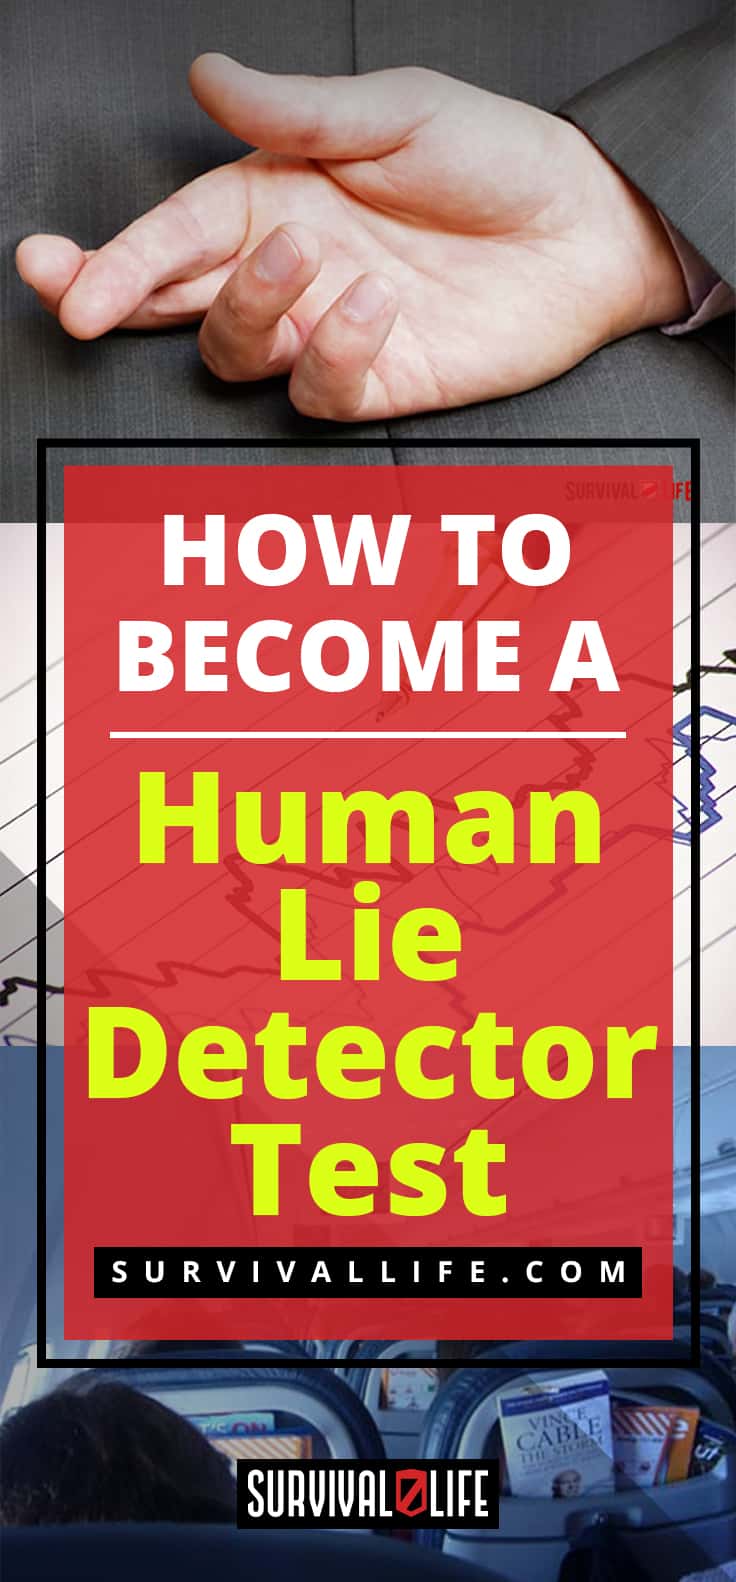 Lie Detector | How To Become A Human Lie Detector Test